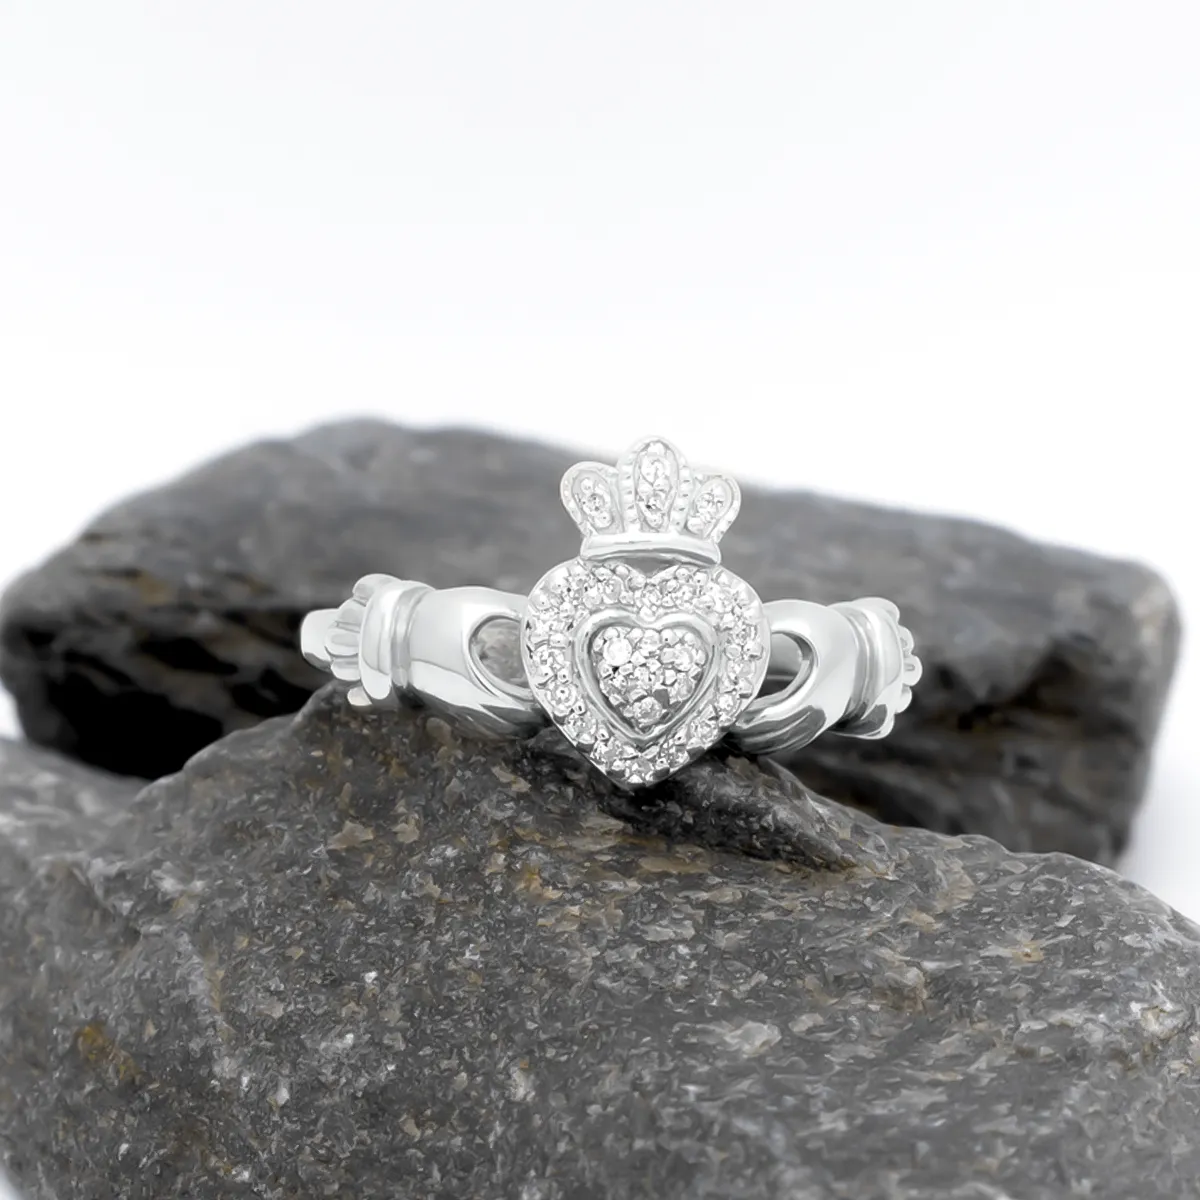 Shimmering 0.15 Carat Diamond Claddagh Ring Crafted In White Gold...